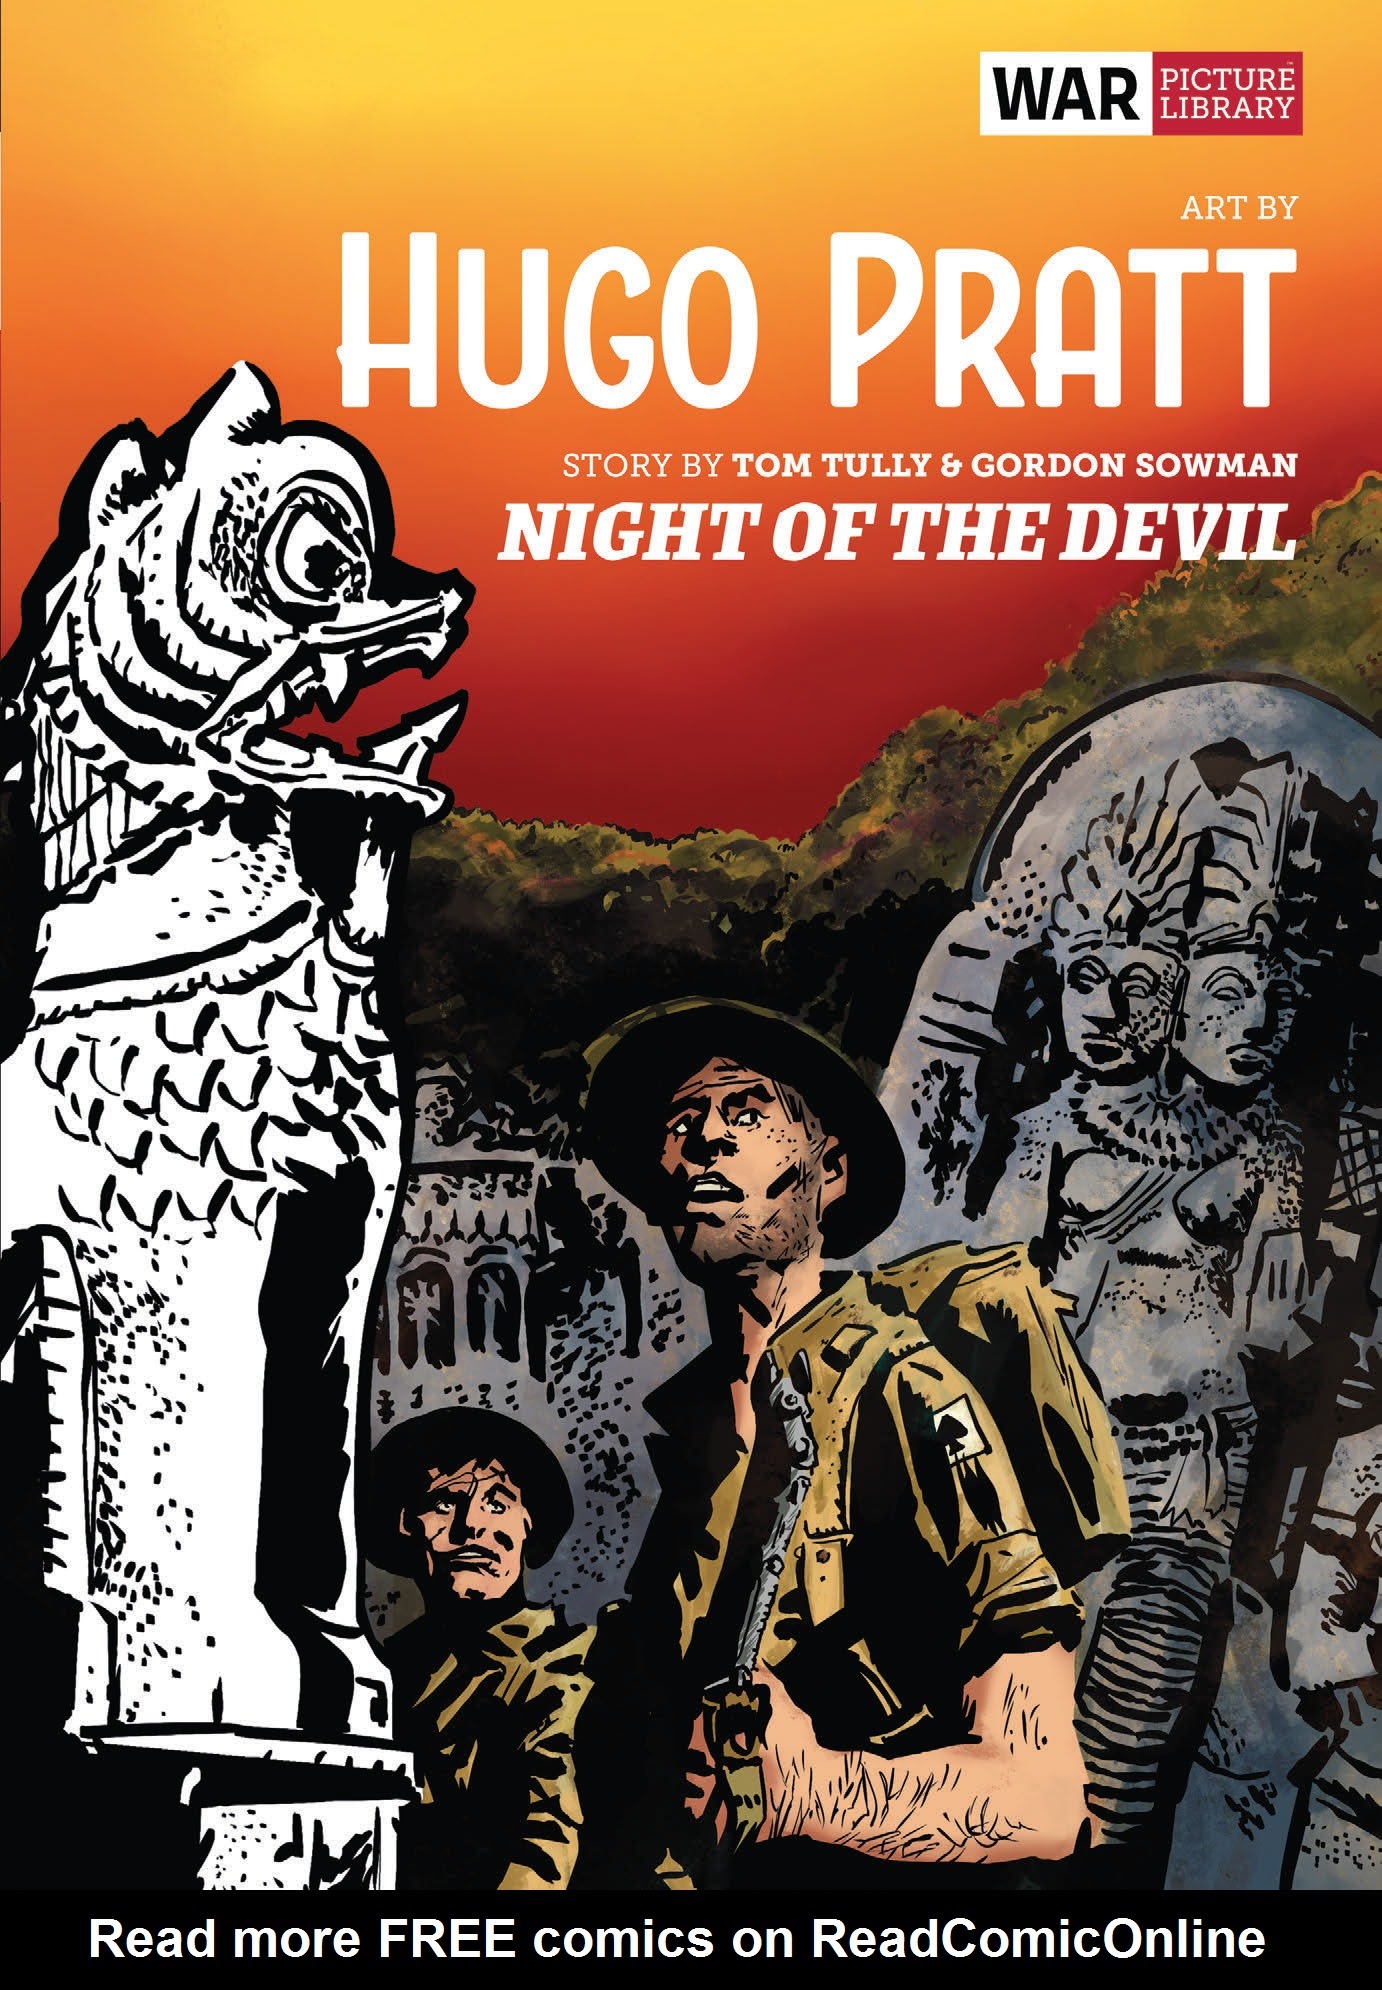 Read online War Picture Library: Night of the Devil comic -  Issue # TPB - 1